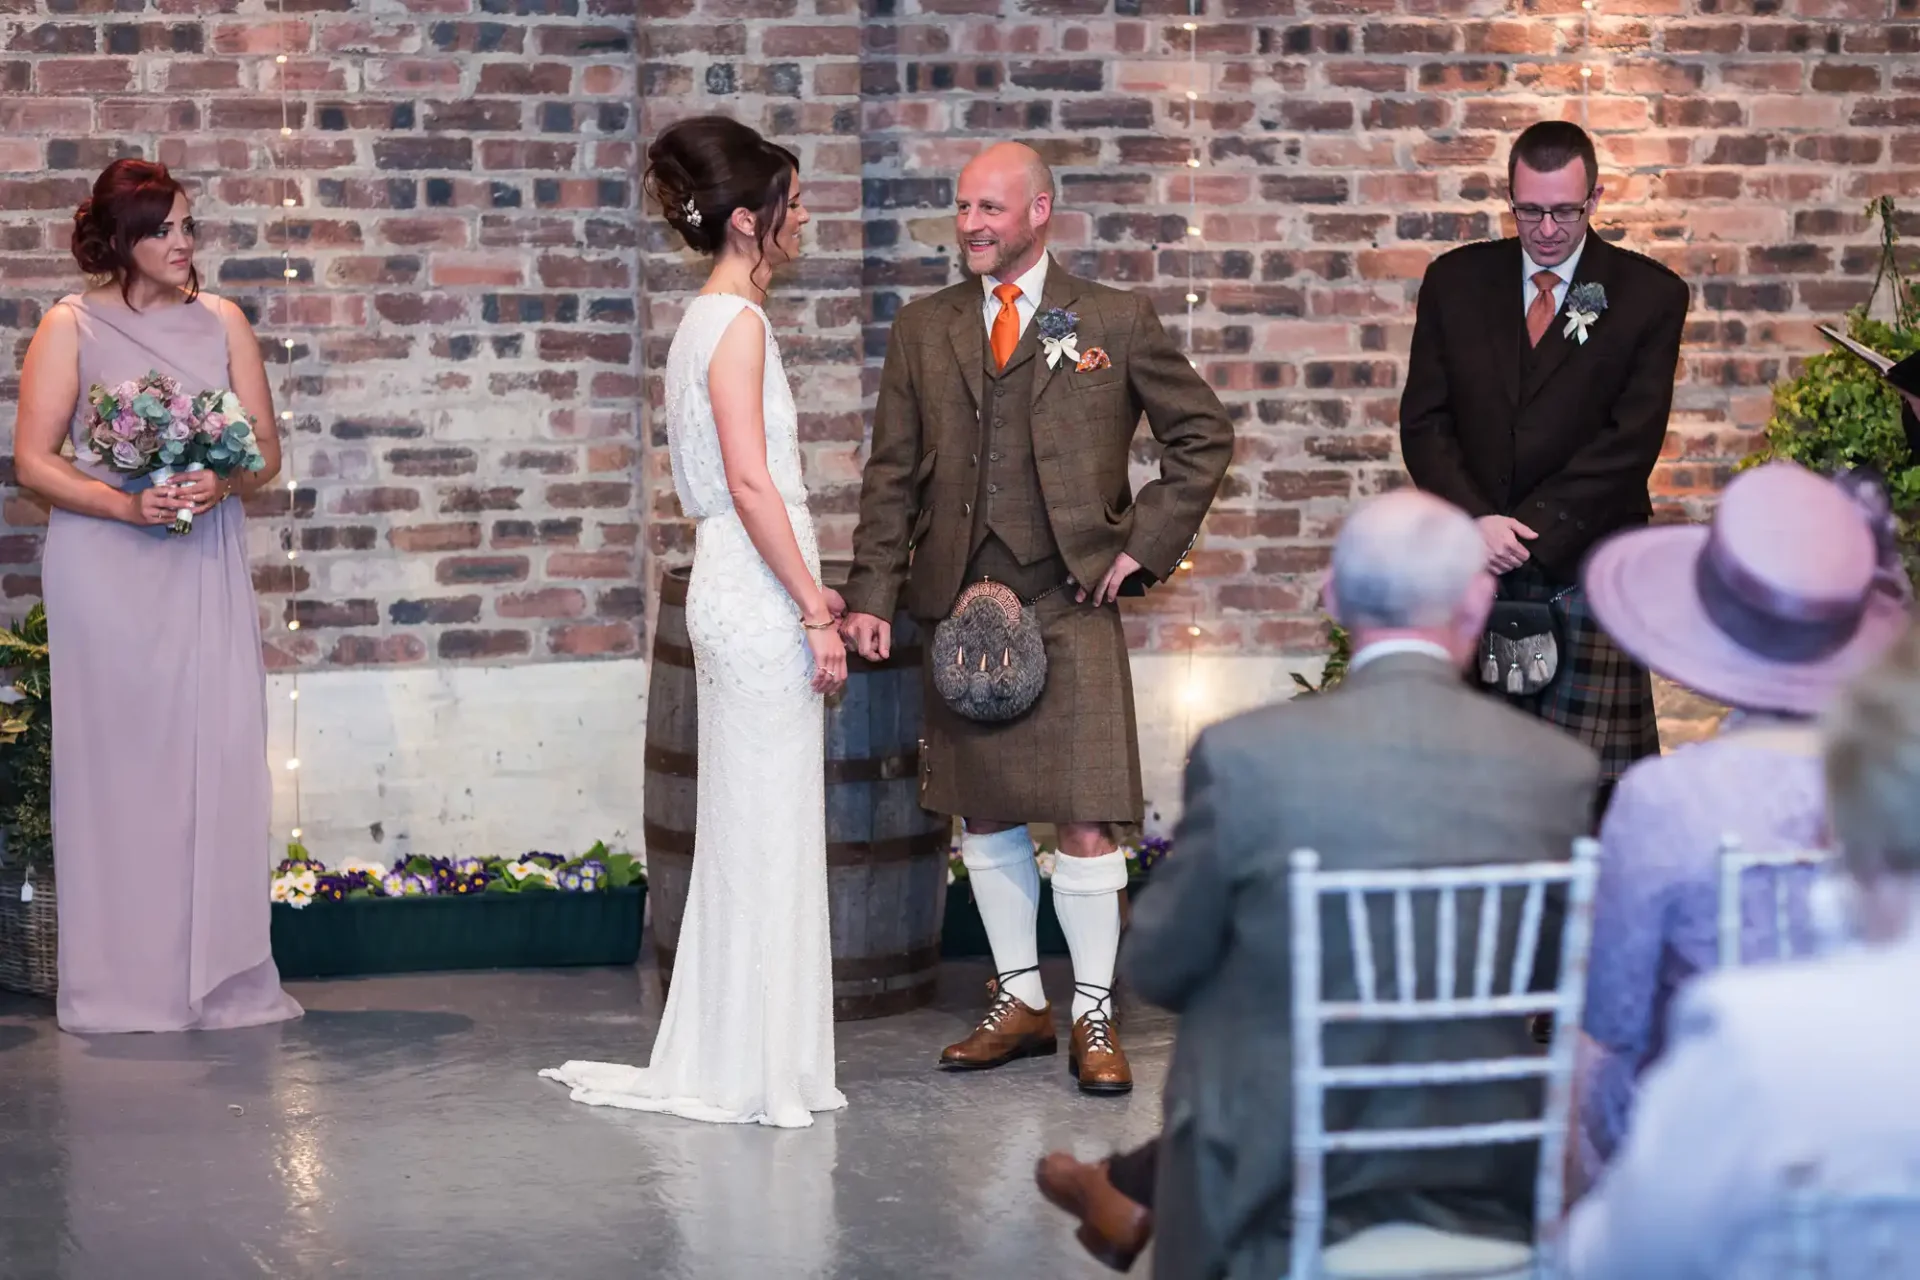 A bride and groom stand facing each other at their wedding, the groom in a kilt, with guests and a brick backdrop.